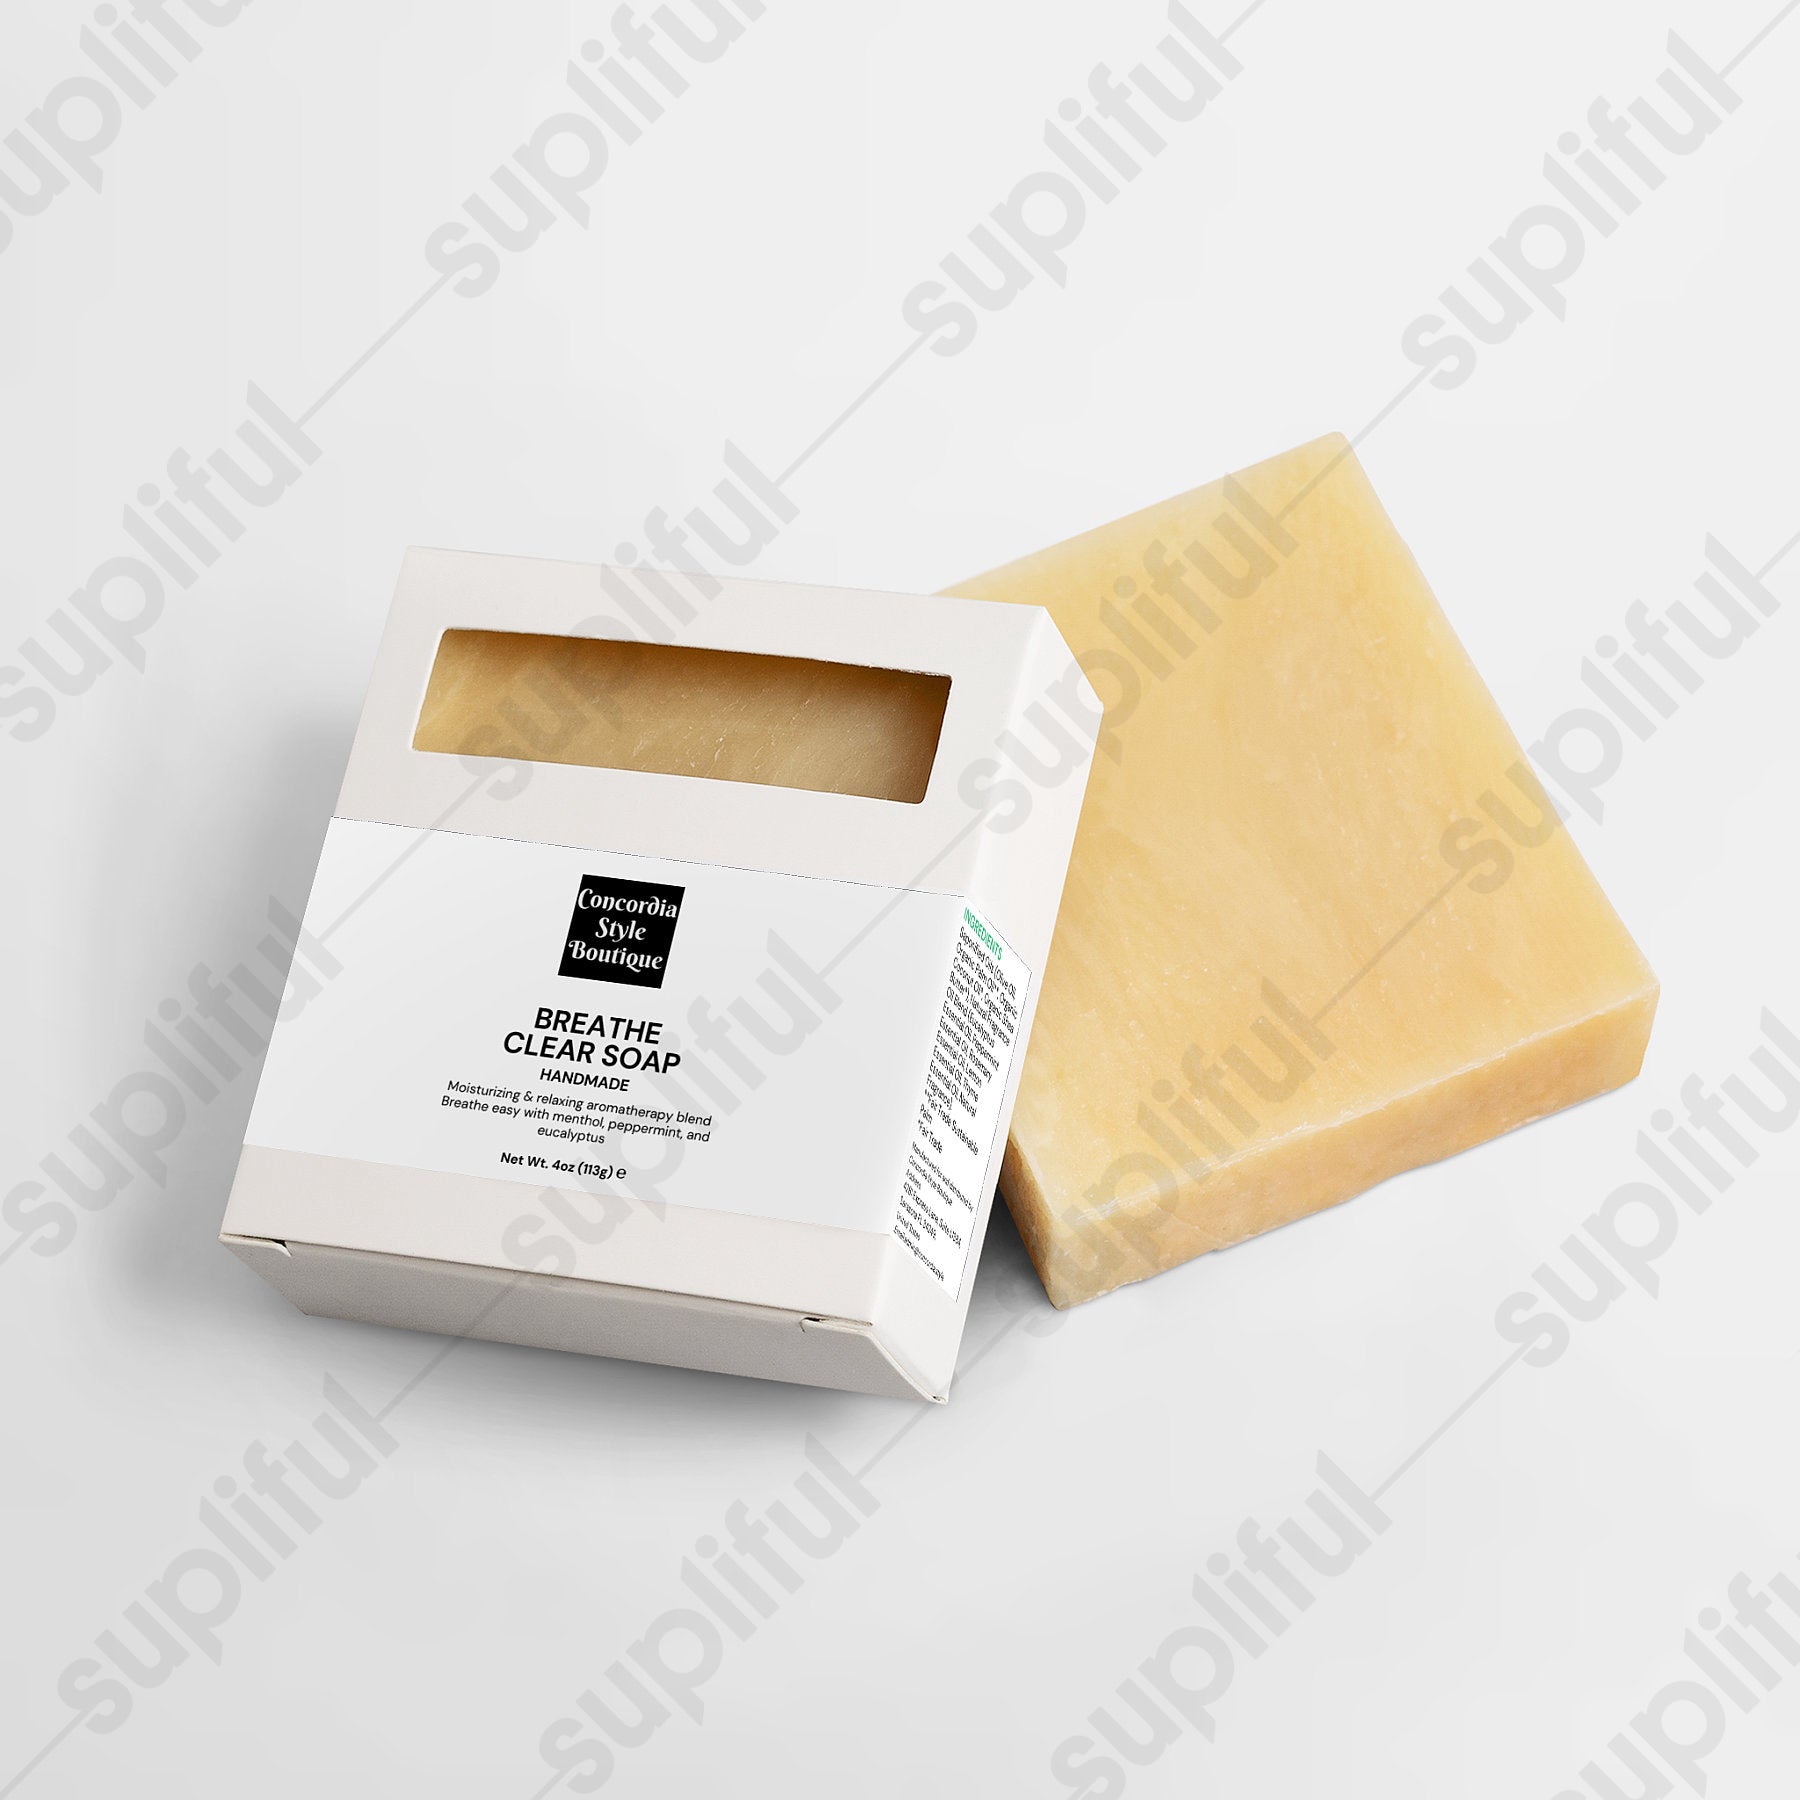 Breathe Clear Soap - Ships exclusively to US - Premium Breathe Clear Soap from Concordia Style Boutique - Just $14.75! Shop now at Concordia Style Boutique